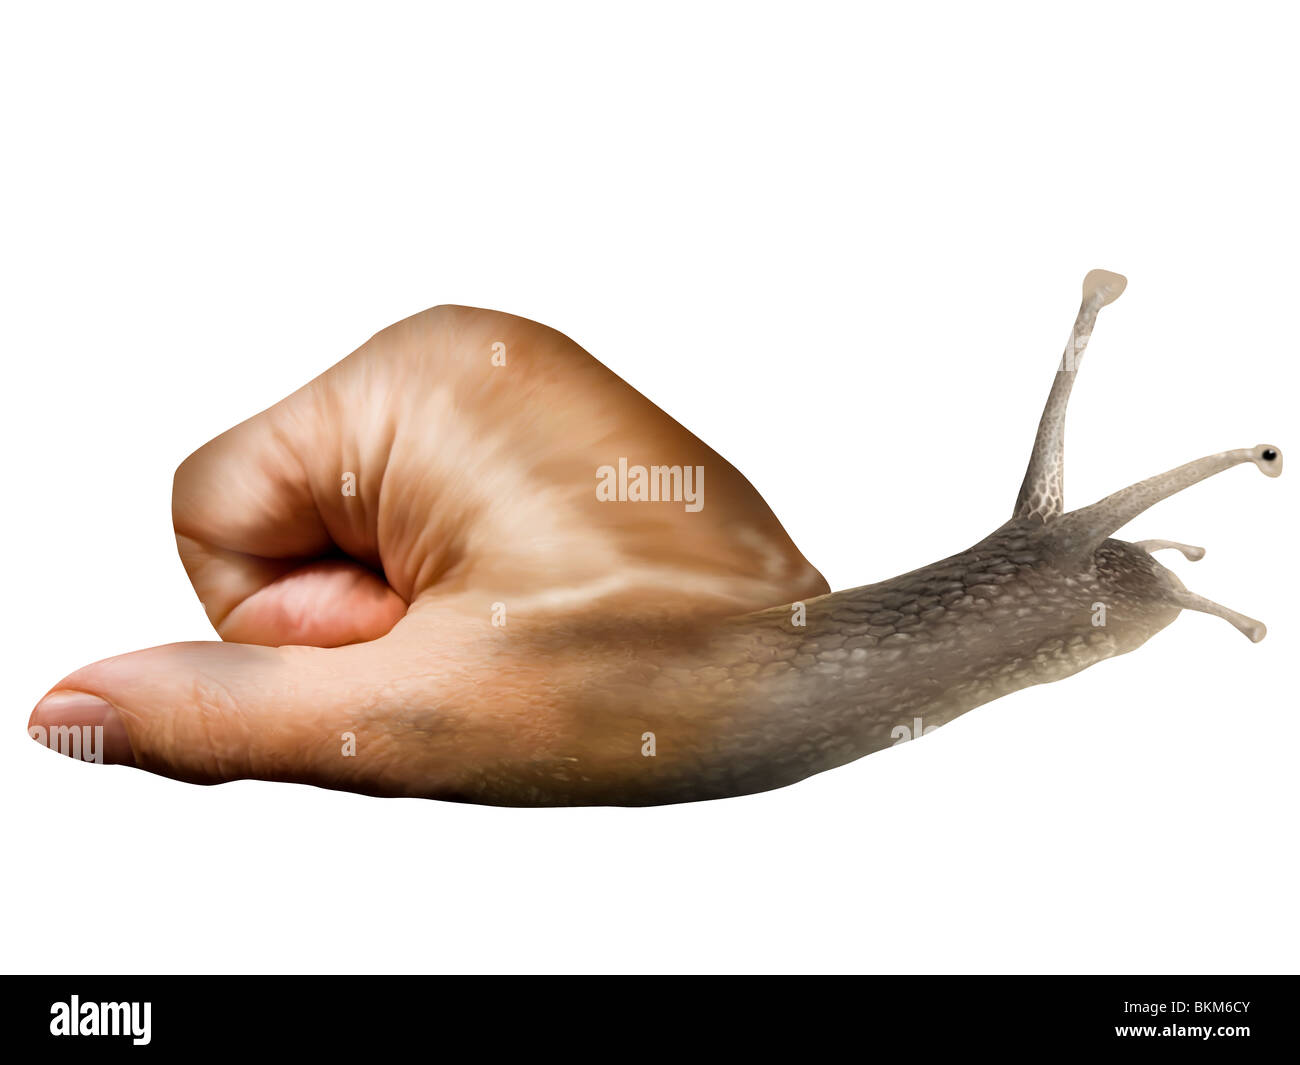 Surreal snail with a hand for a shell Stock Photo